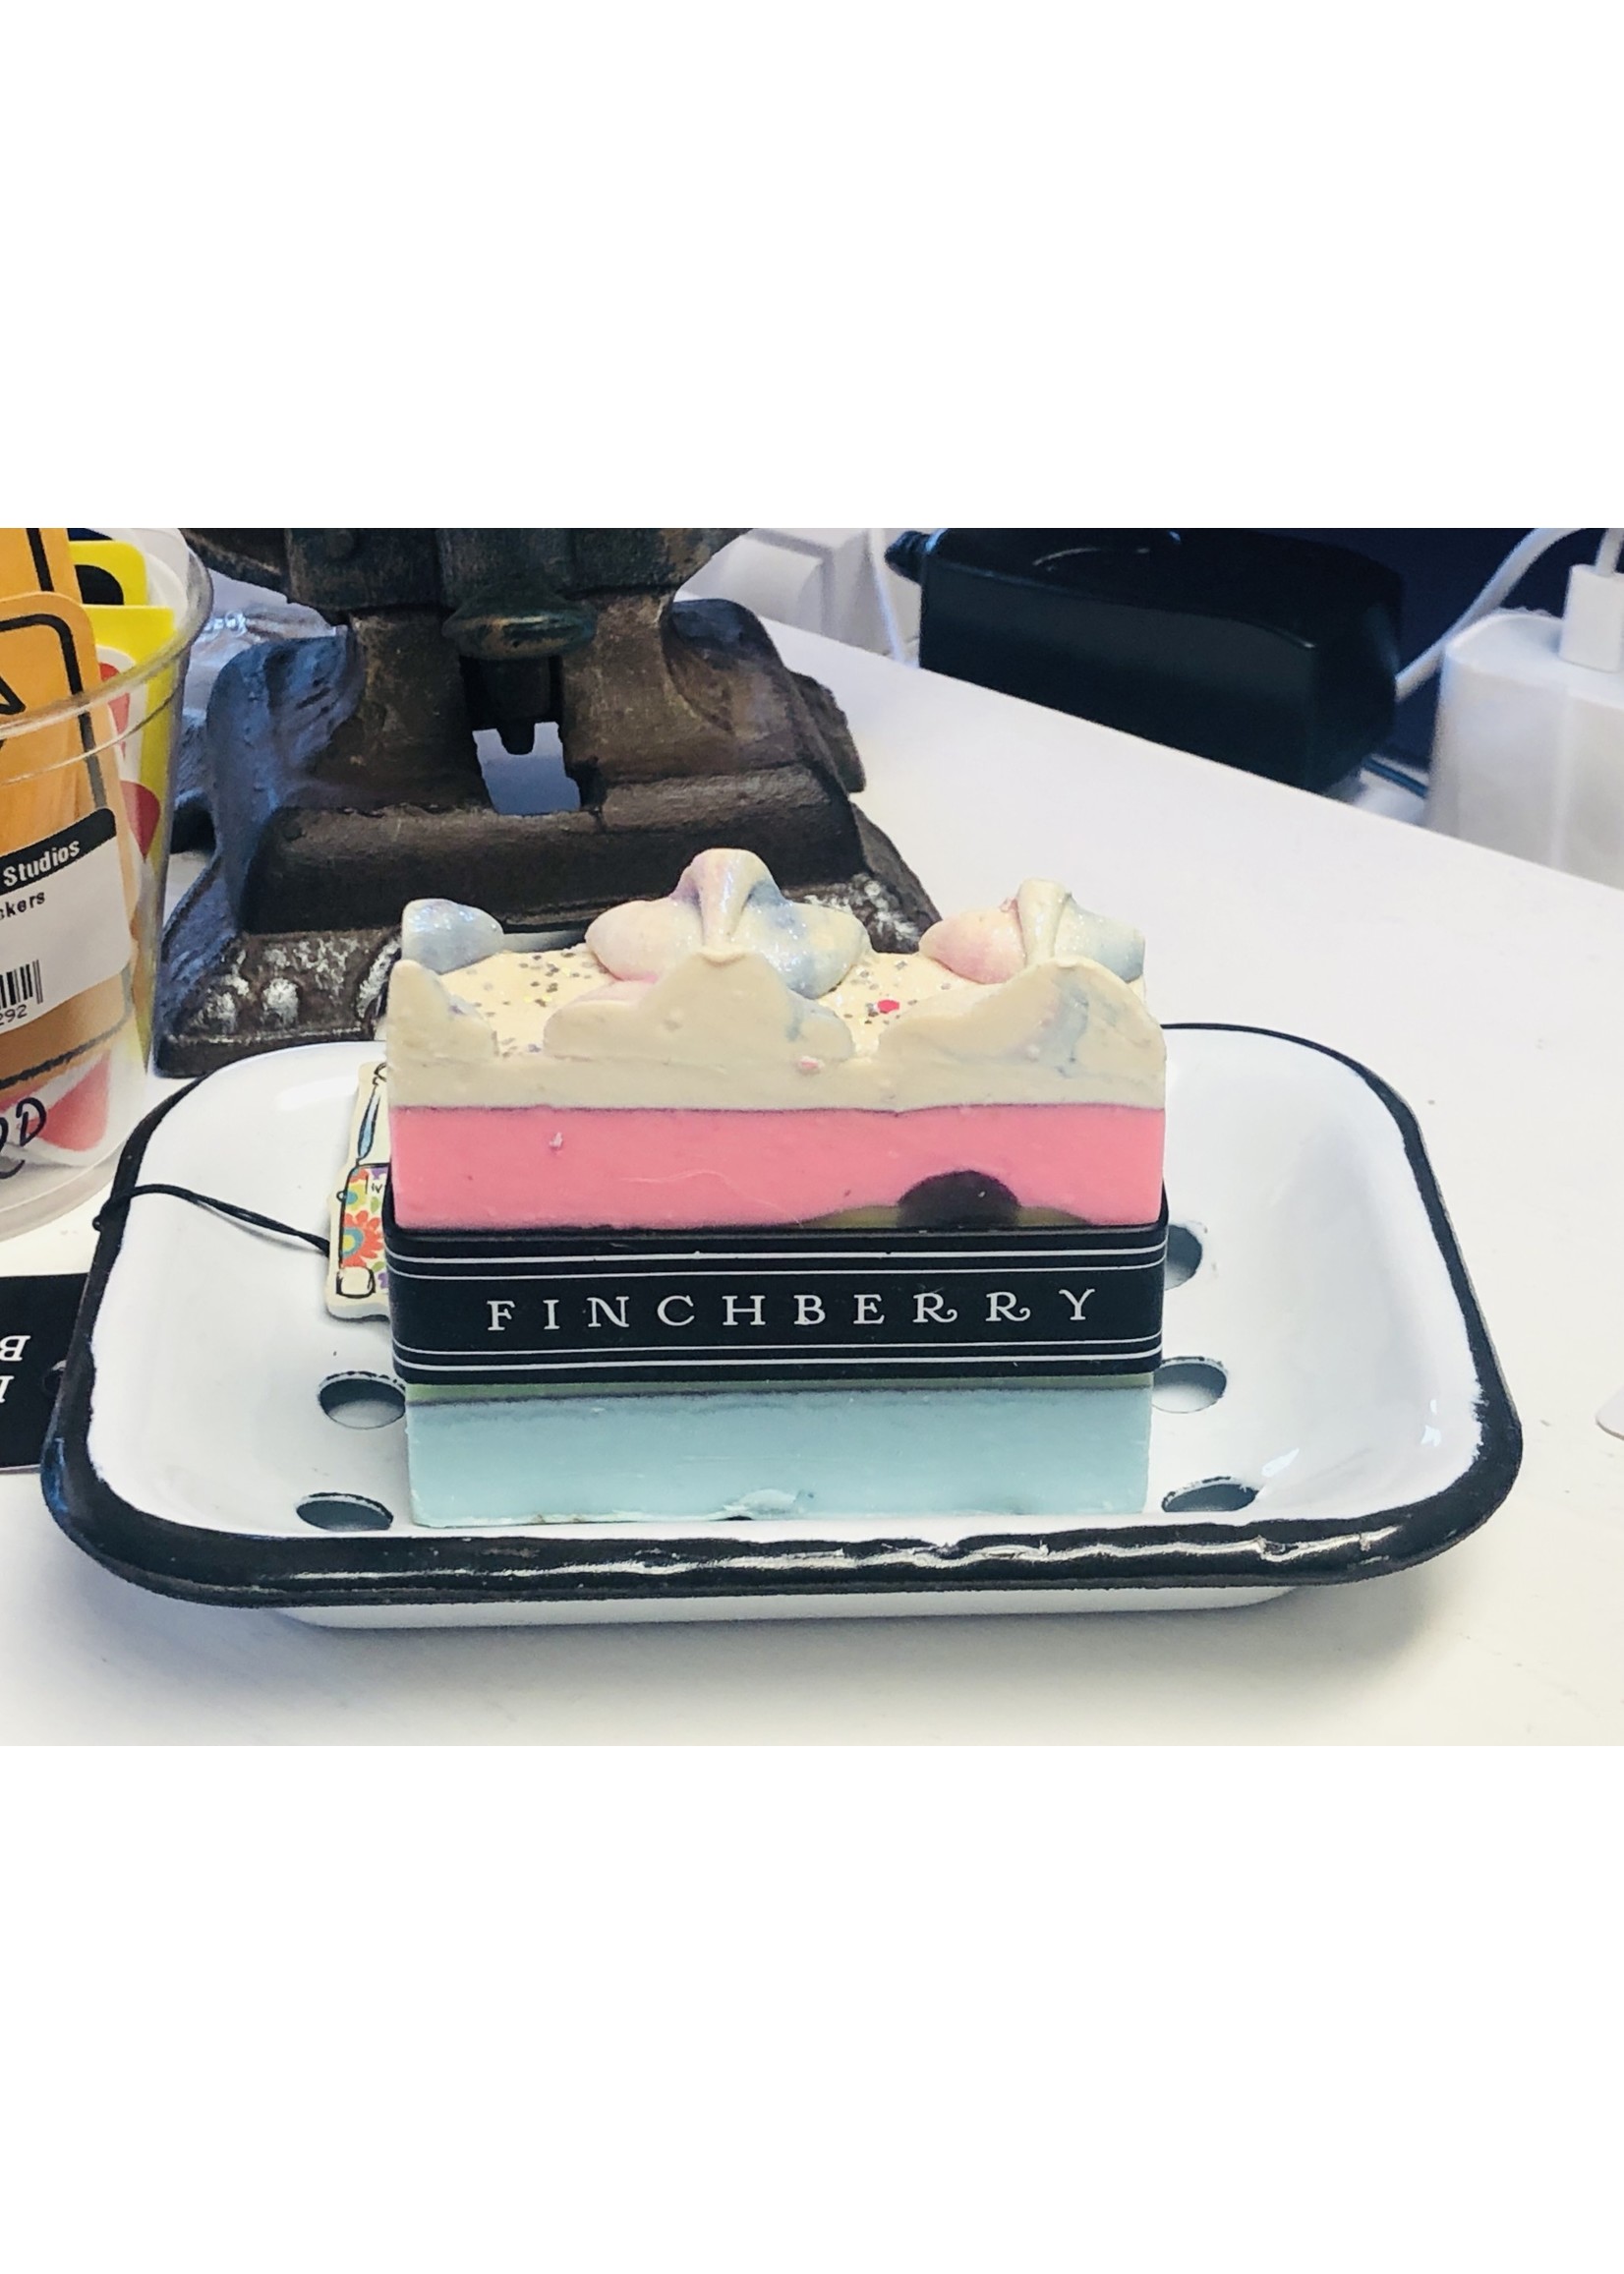 Finchberry Finchberry Soap